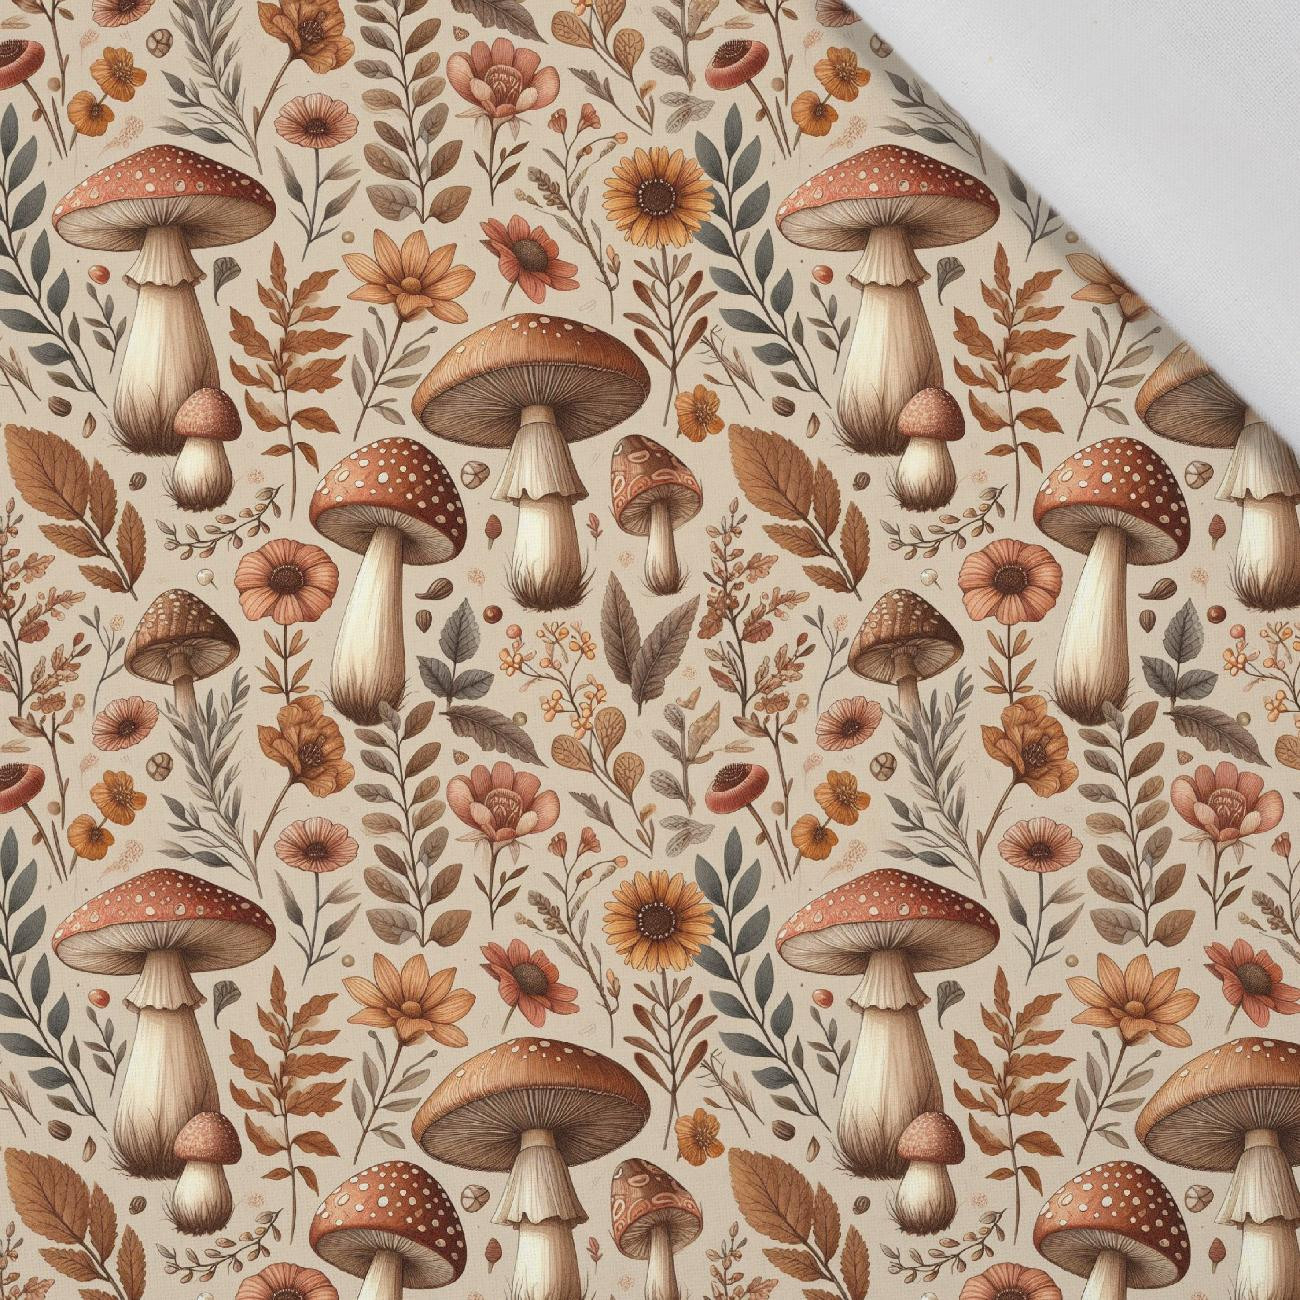 BOTANICAL FOREST wz.2 - Cotton woven fabric